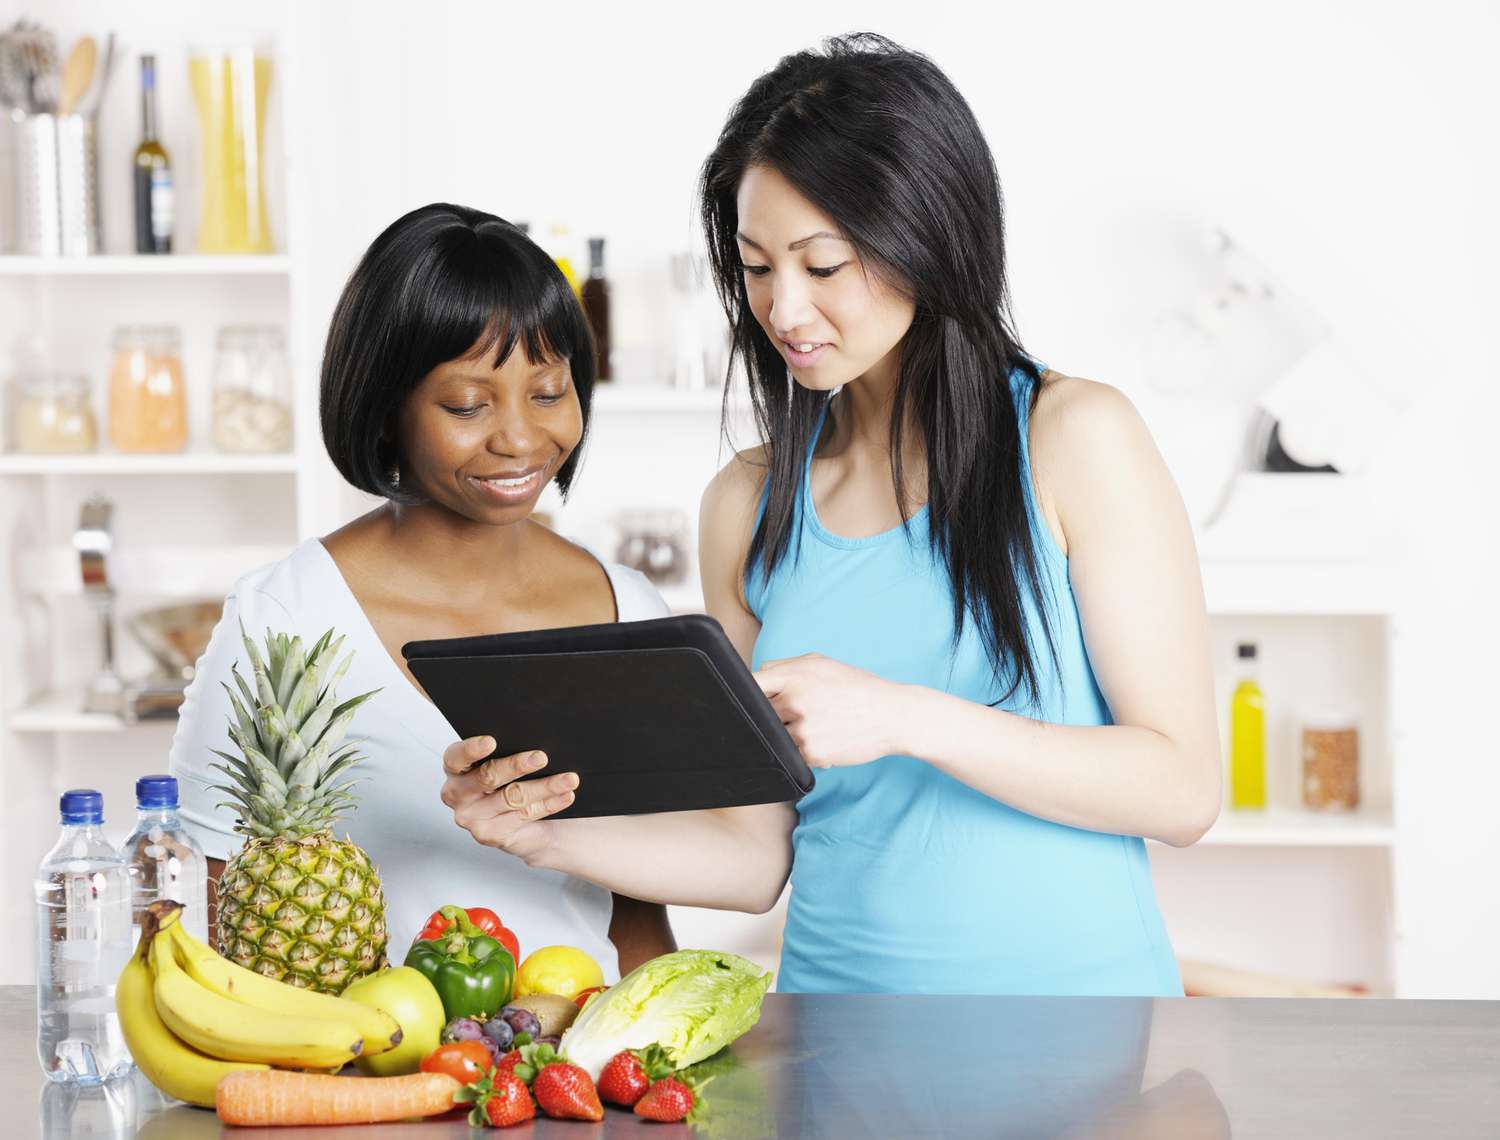 Dietitians and nutritionists are similar and can help improve your diet.